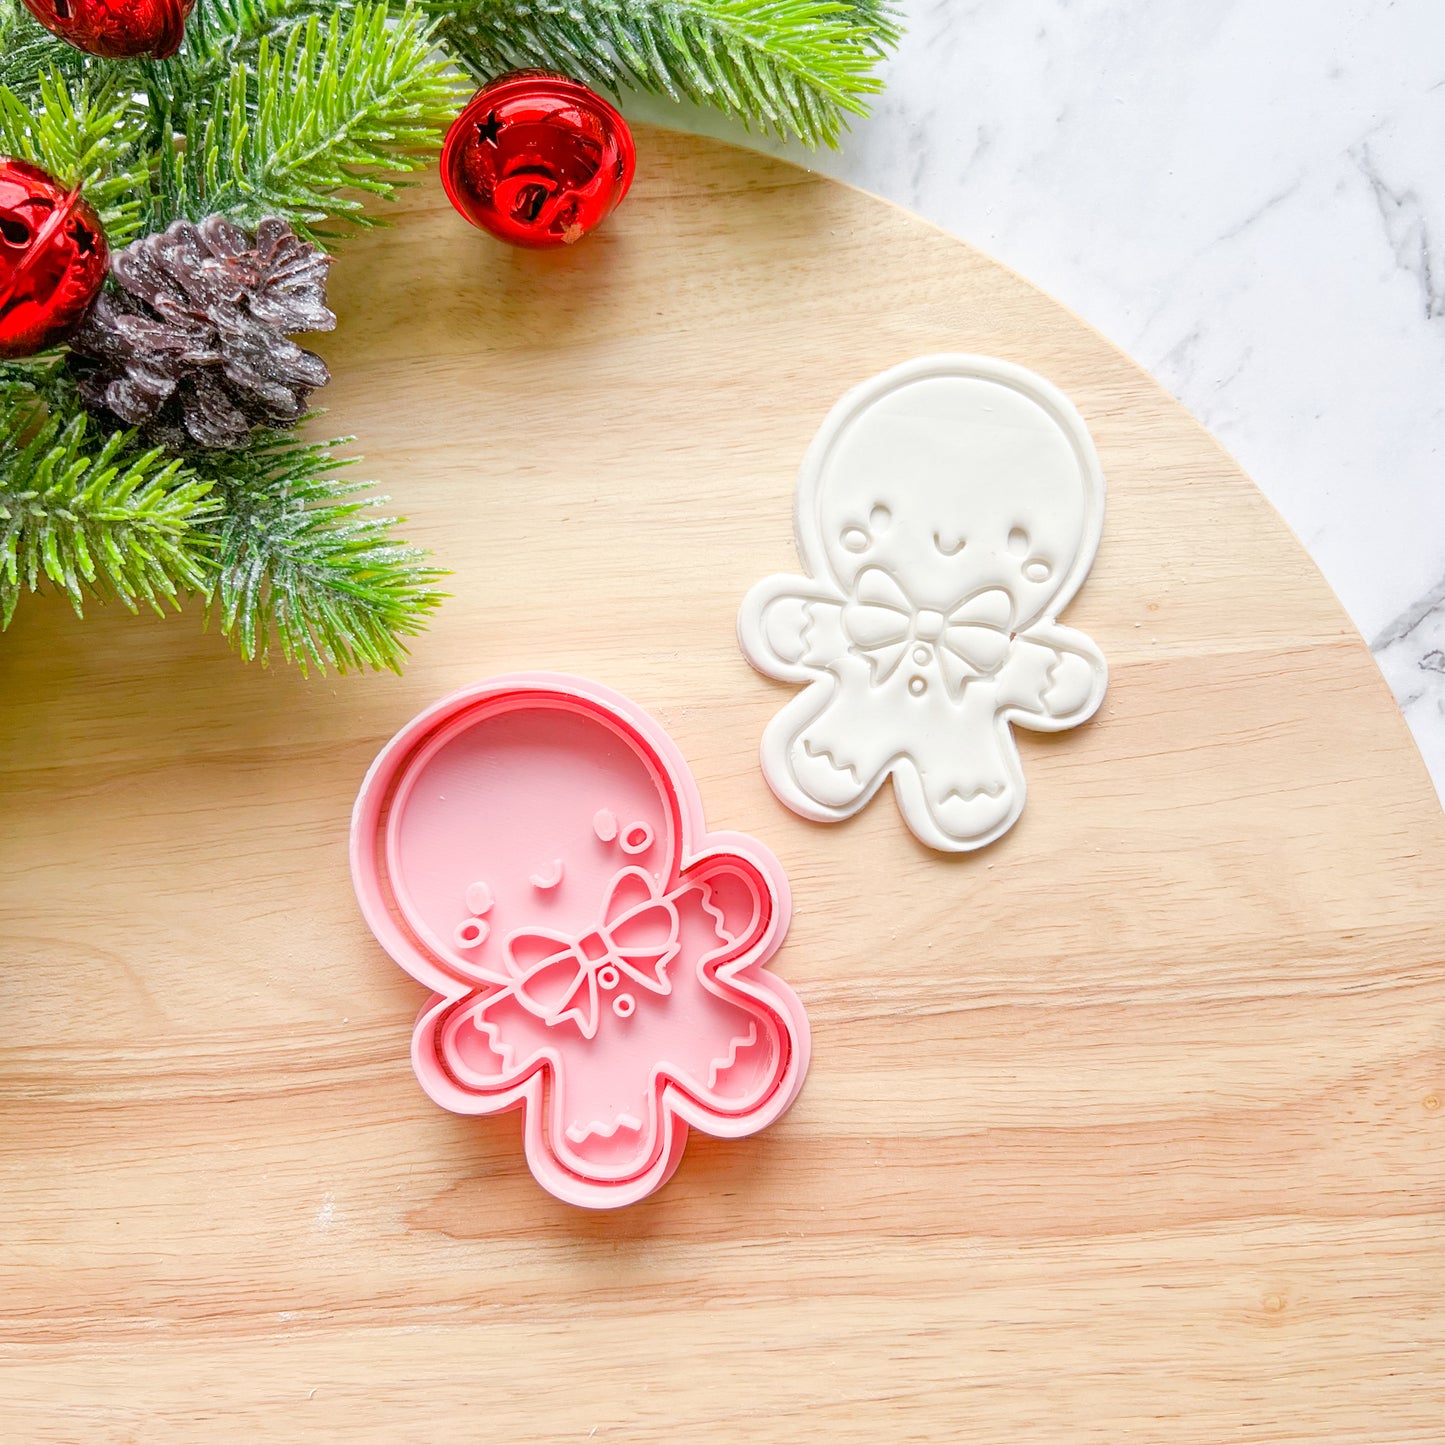 "Gingerbread" Cookie Cutter & Stamp